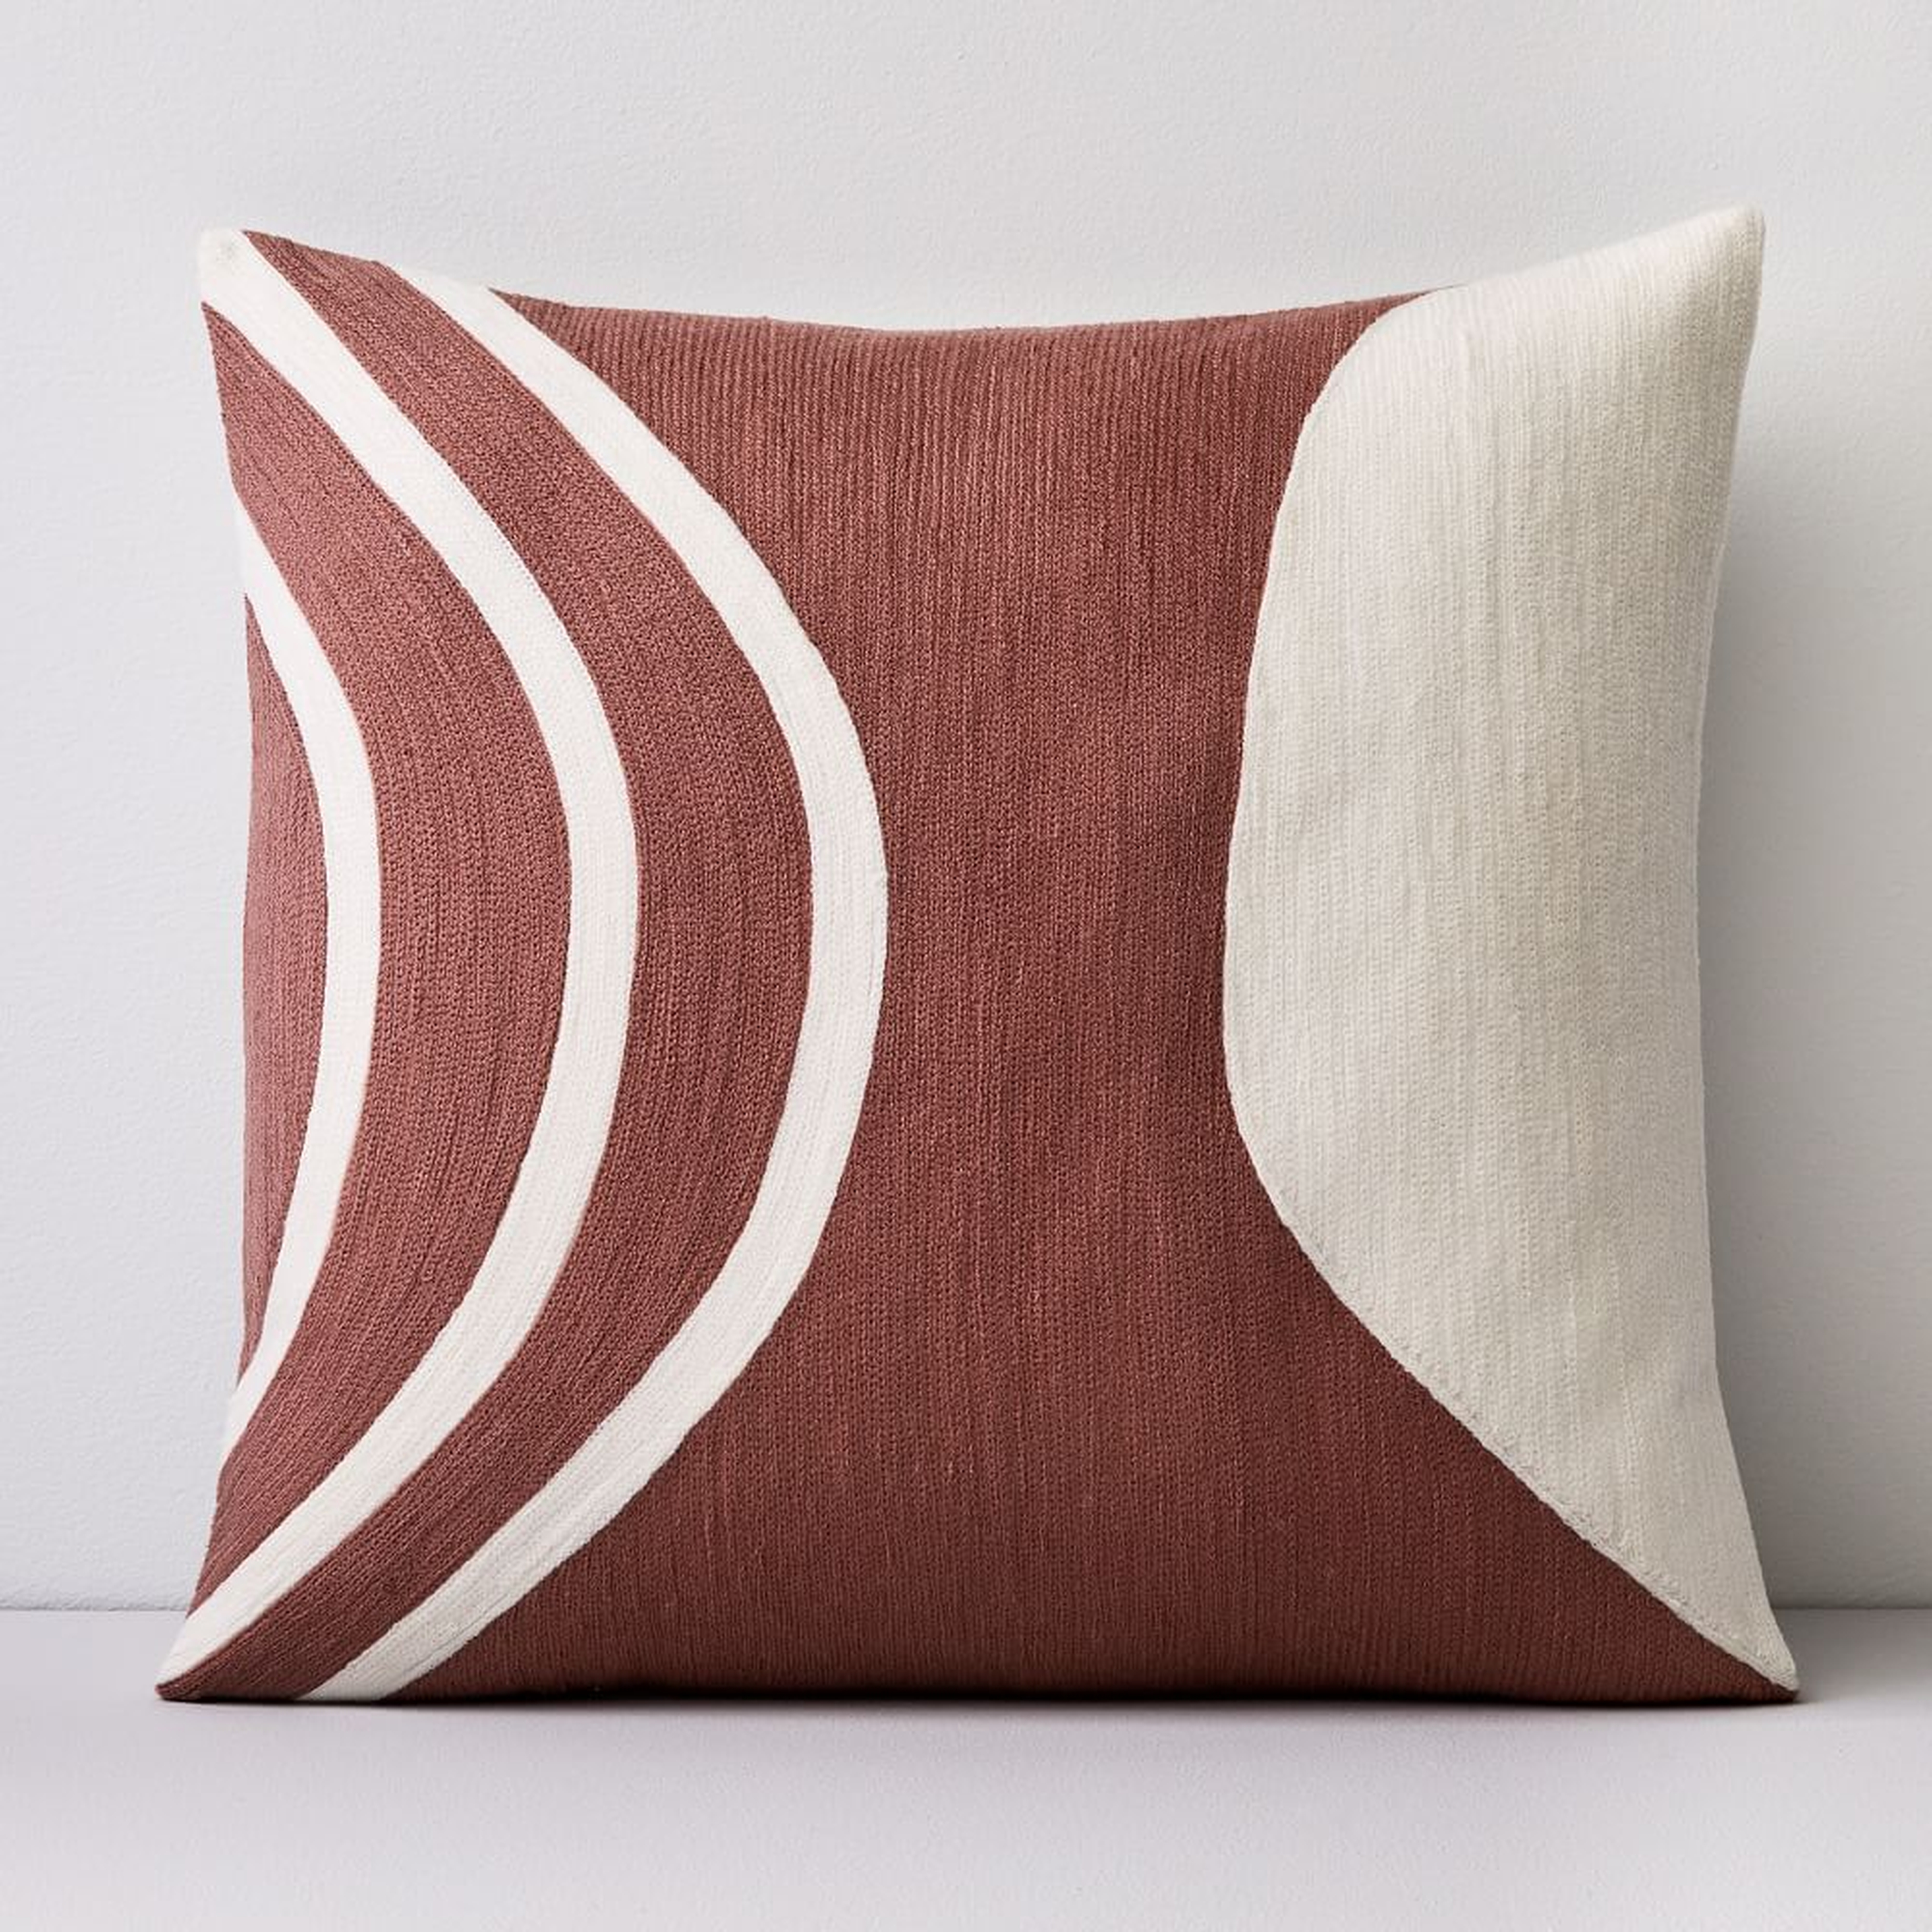 Crewel Rounded Pillow Cover, Pink Stone, 20"x20" - West Elm